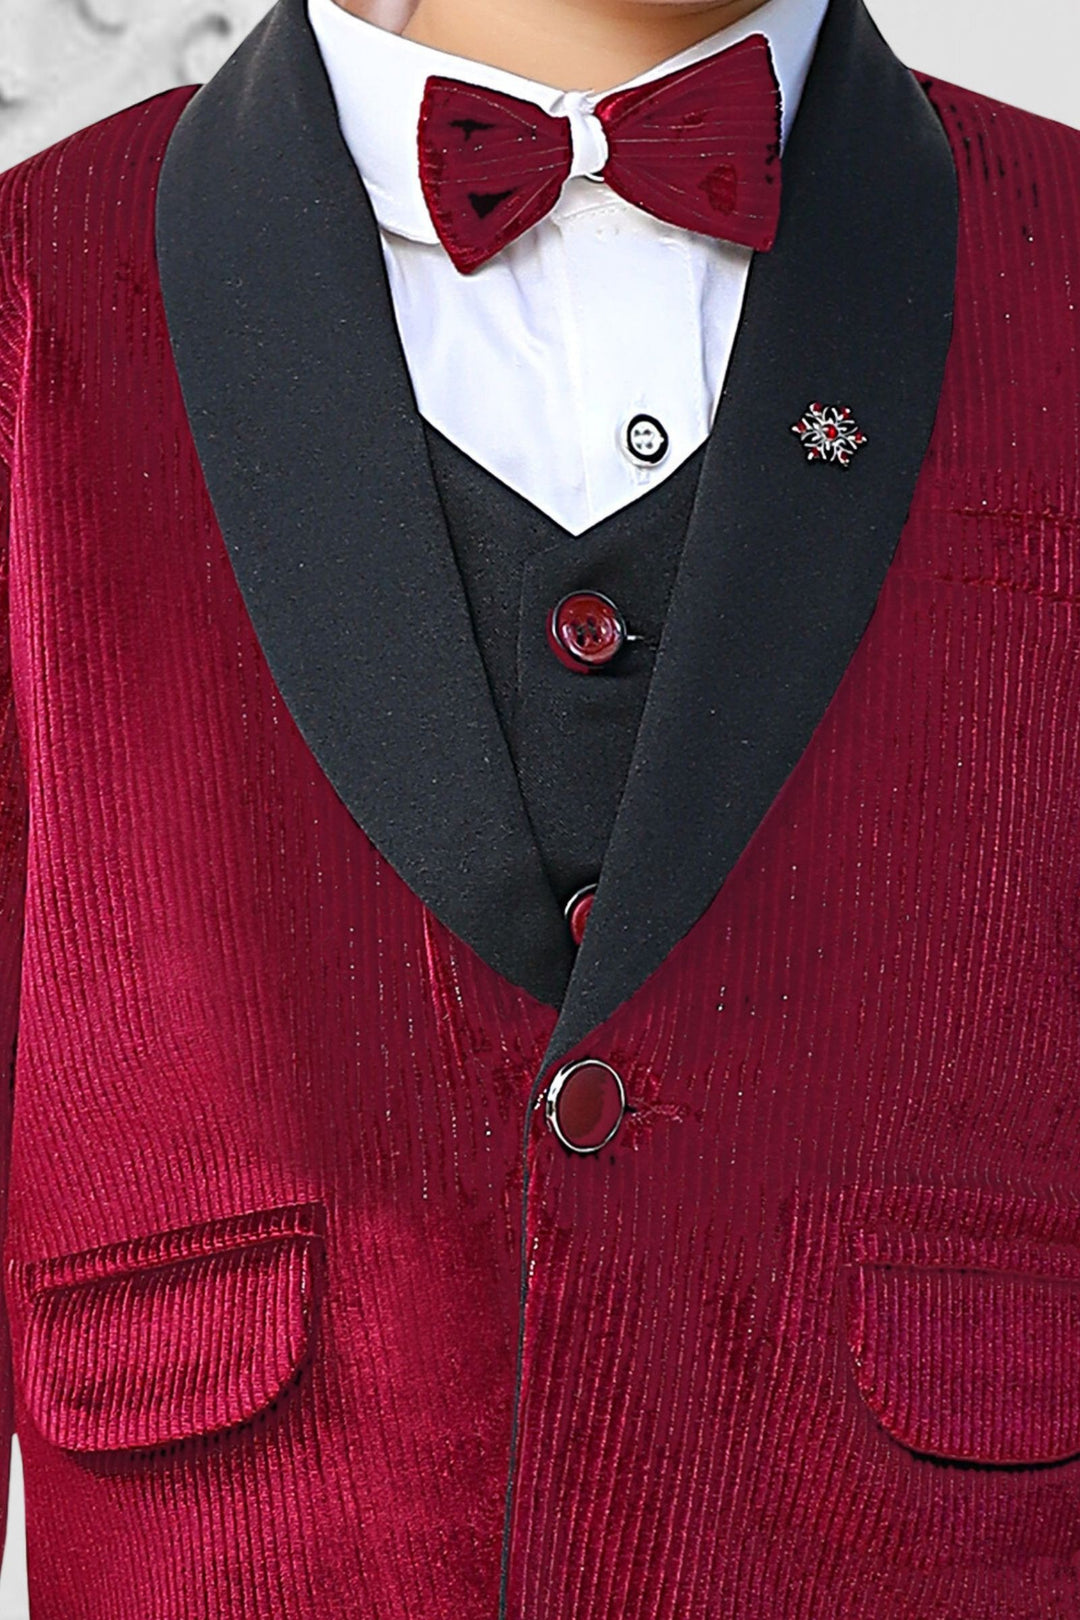 Maroon, White with Black Waist Coat and Set for Boys